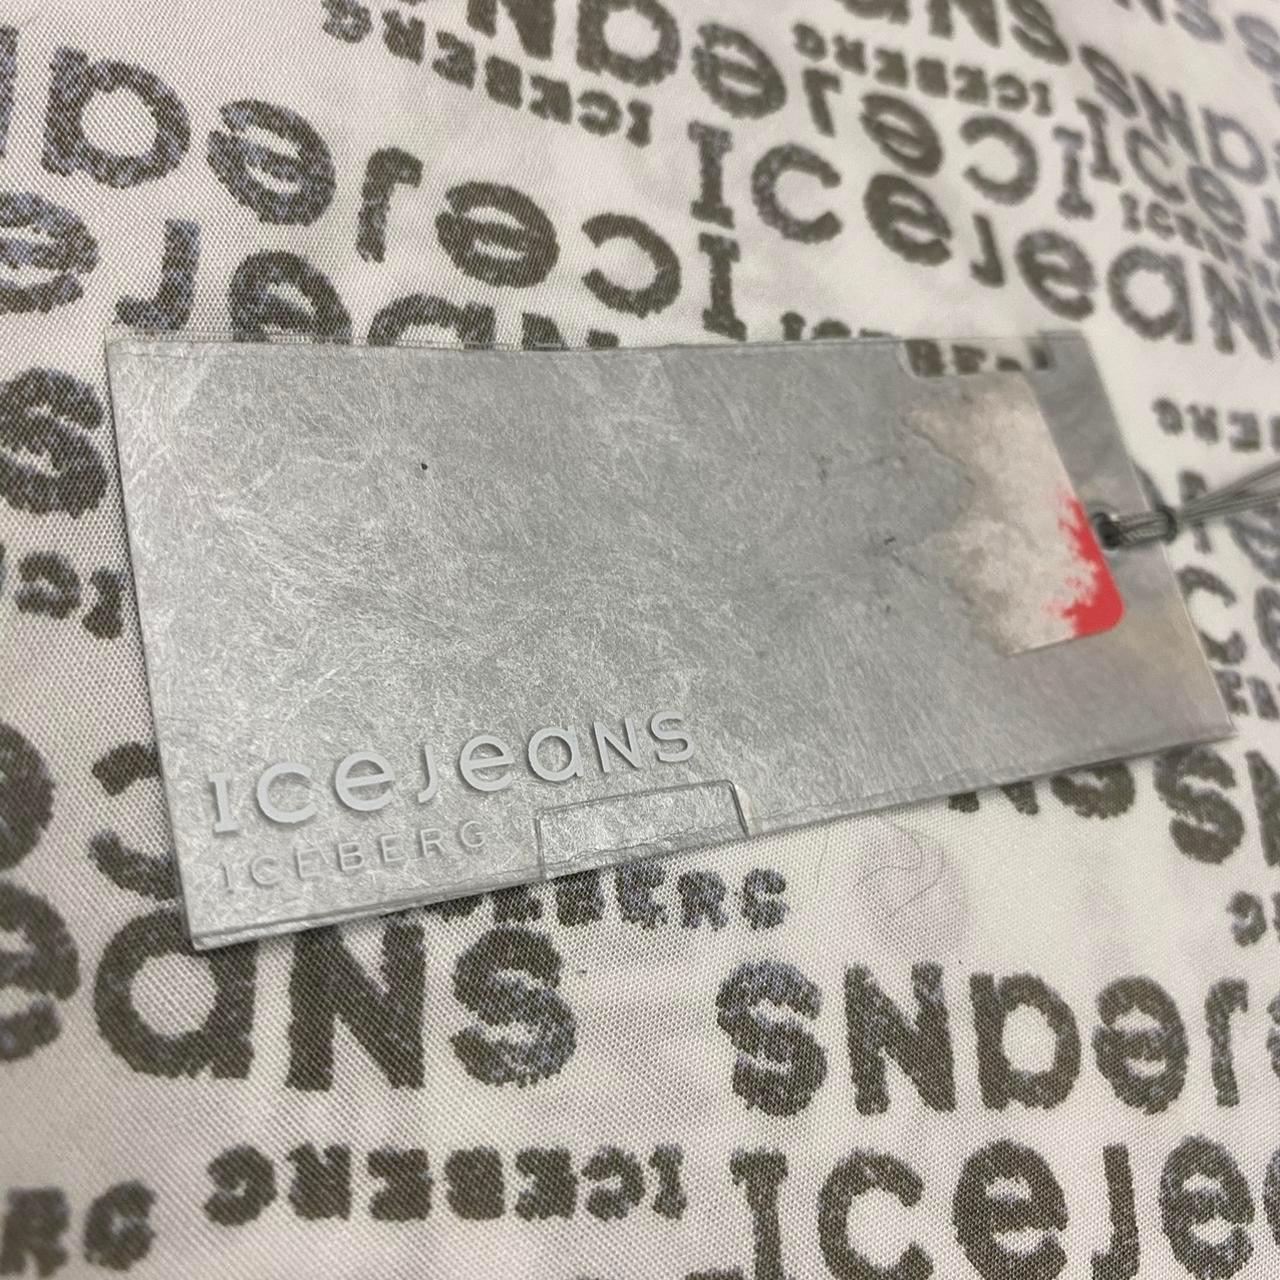 Iceberg Icejeans Fade Shirt DSWT - XL - Known Source